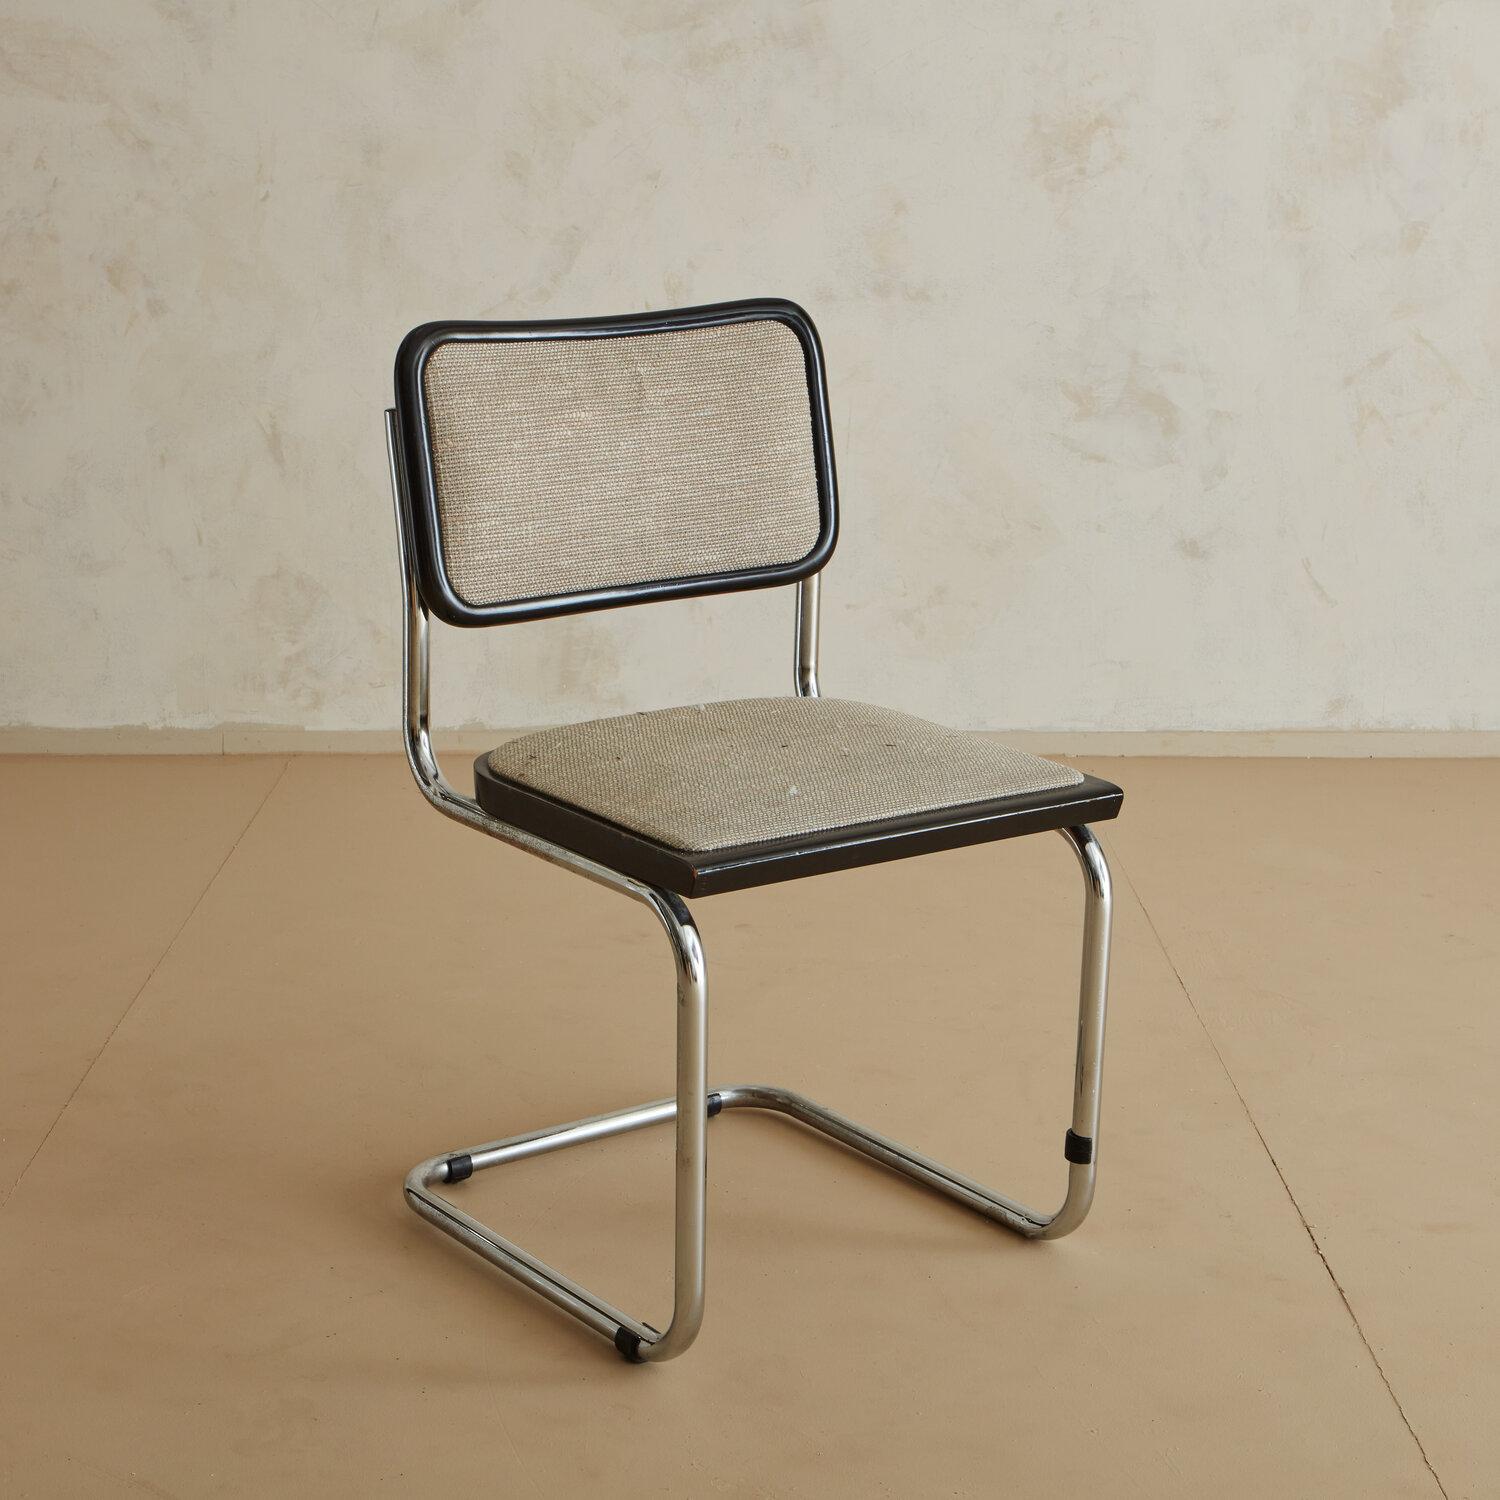 A simple, stylish and utilitarian mid-century desk chair reminiscent of Marcel Breuer’s iconic Cesca chair designed in 1928. This chair features a tubular chrome frame, black lacquered wood and original upholstery.